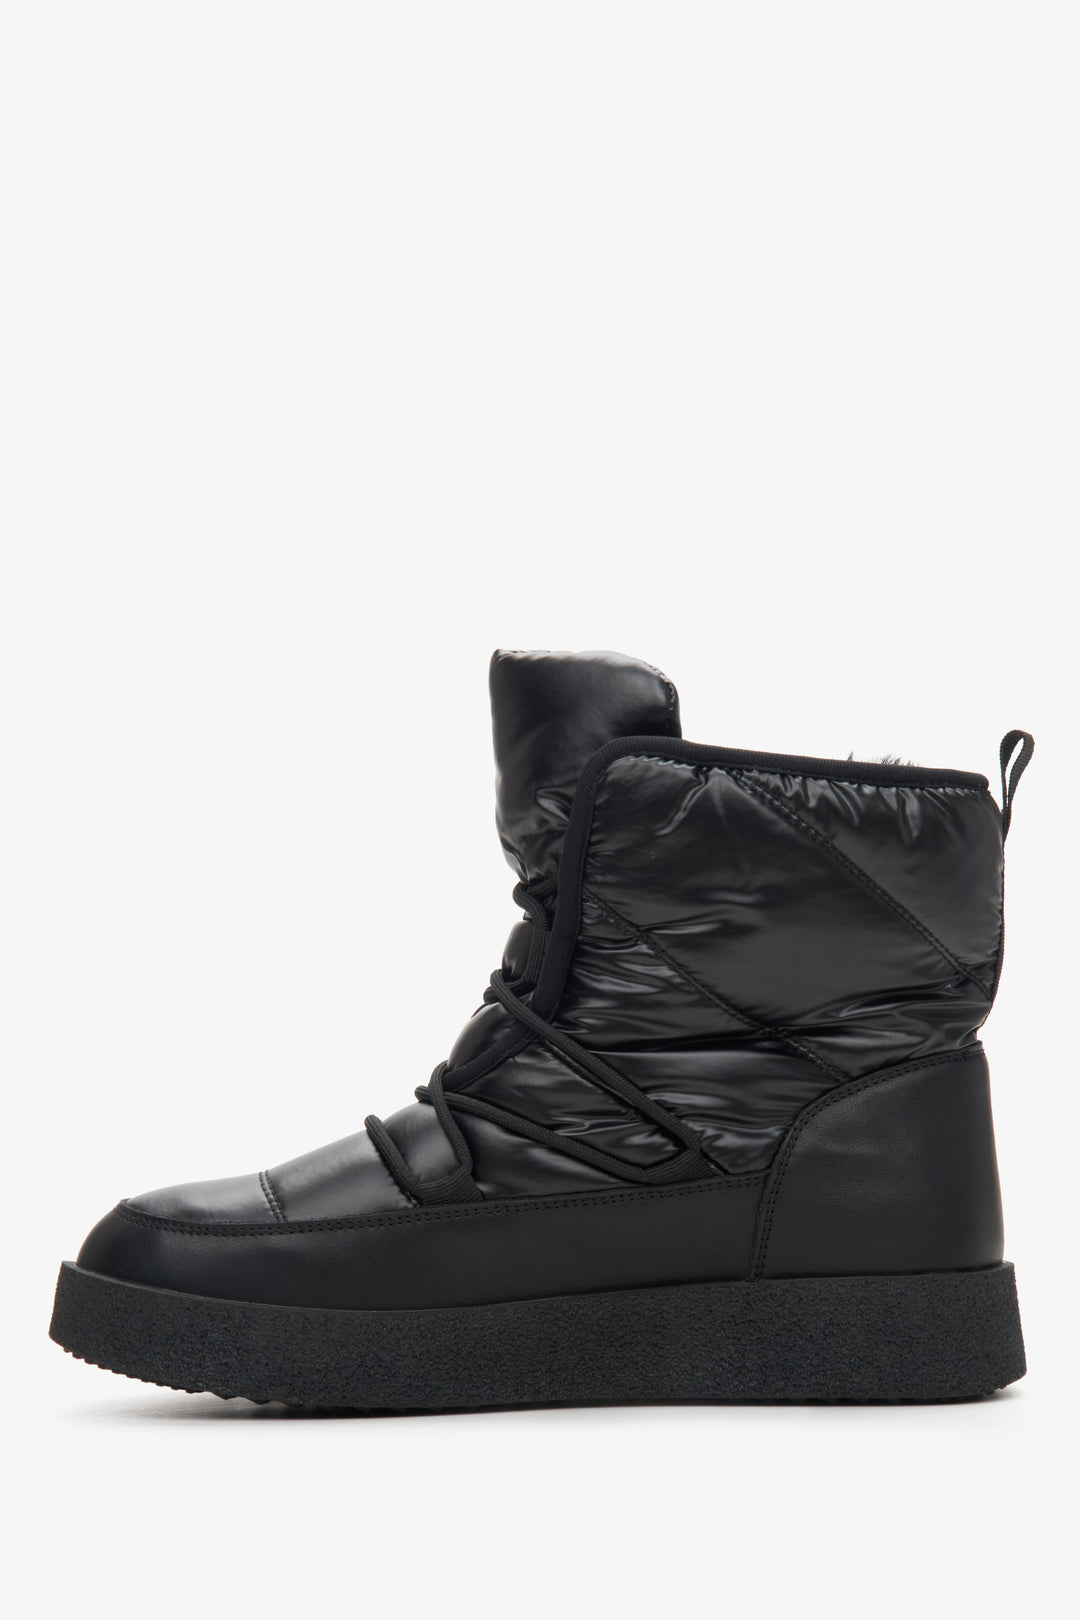 Women's black snow boots with a glossy finish by Estro - side view of the shoe.